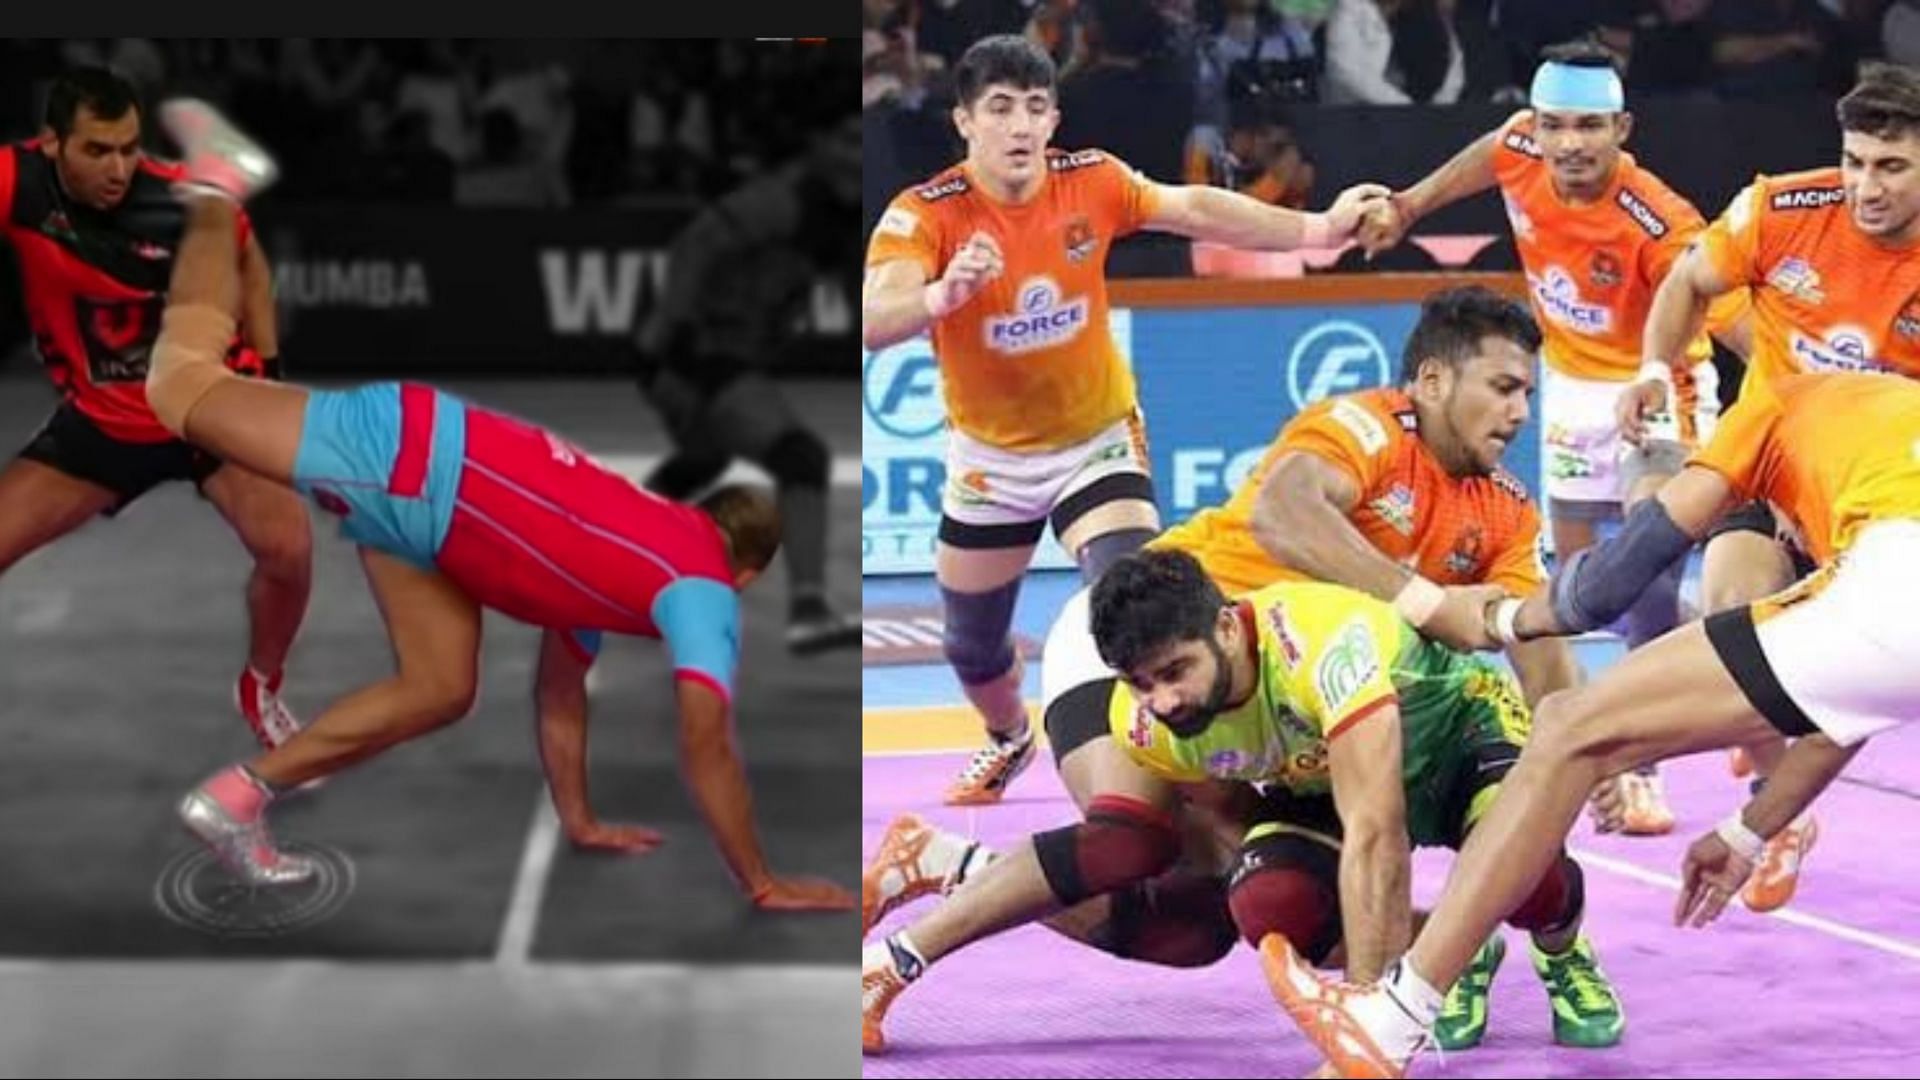 Jasvir Singh (L) made the back kick famous, while the dubki became popular in Pro Kabaddi because of Pardeep Narwal